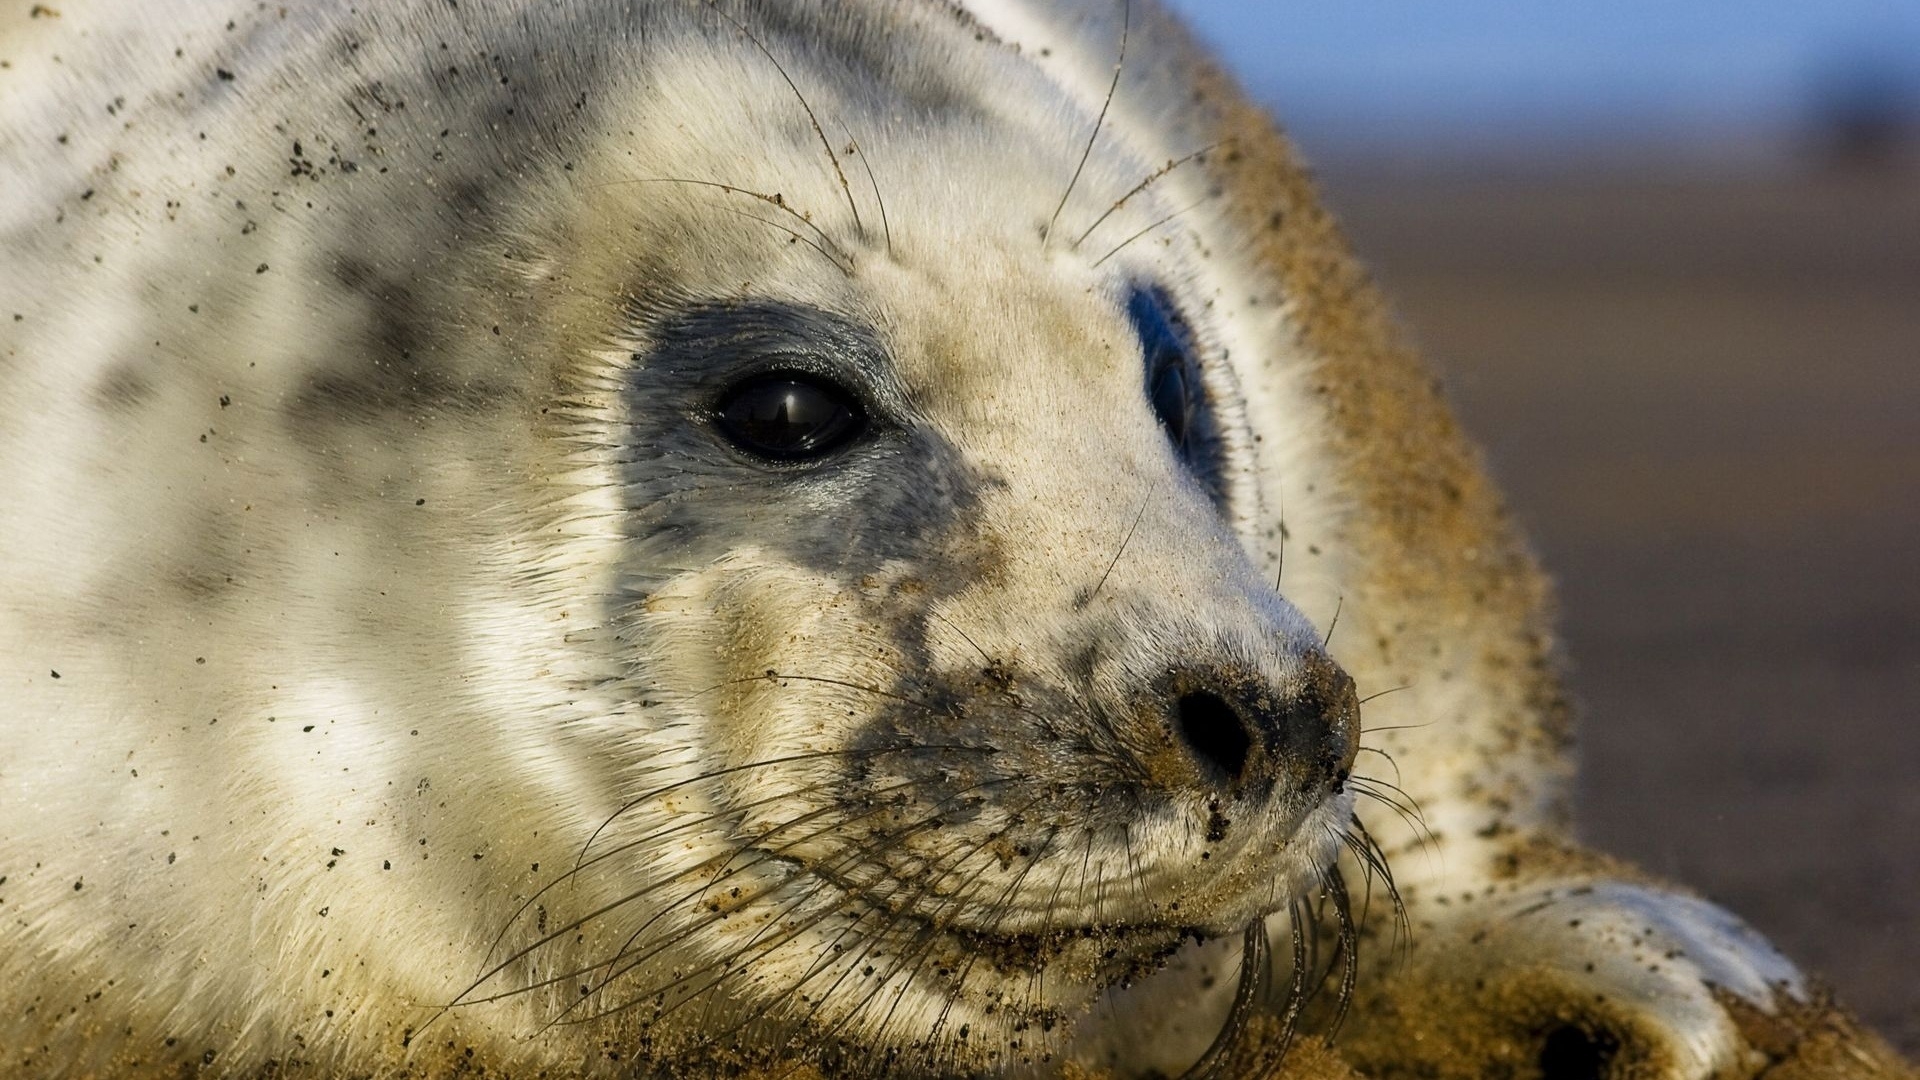 Seal cub for 1920 x 1080 HDTV 1080p resolution